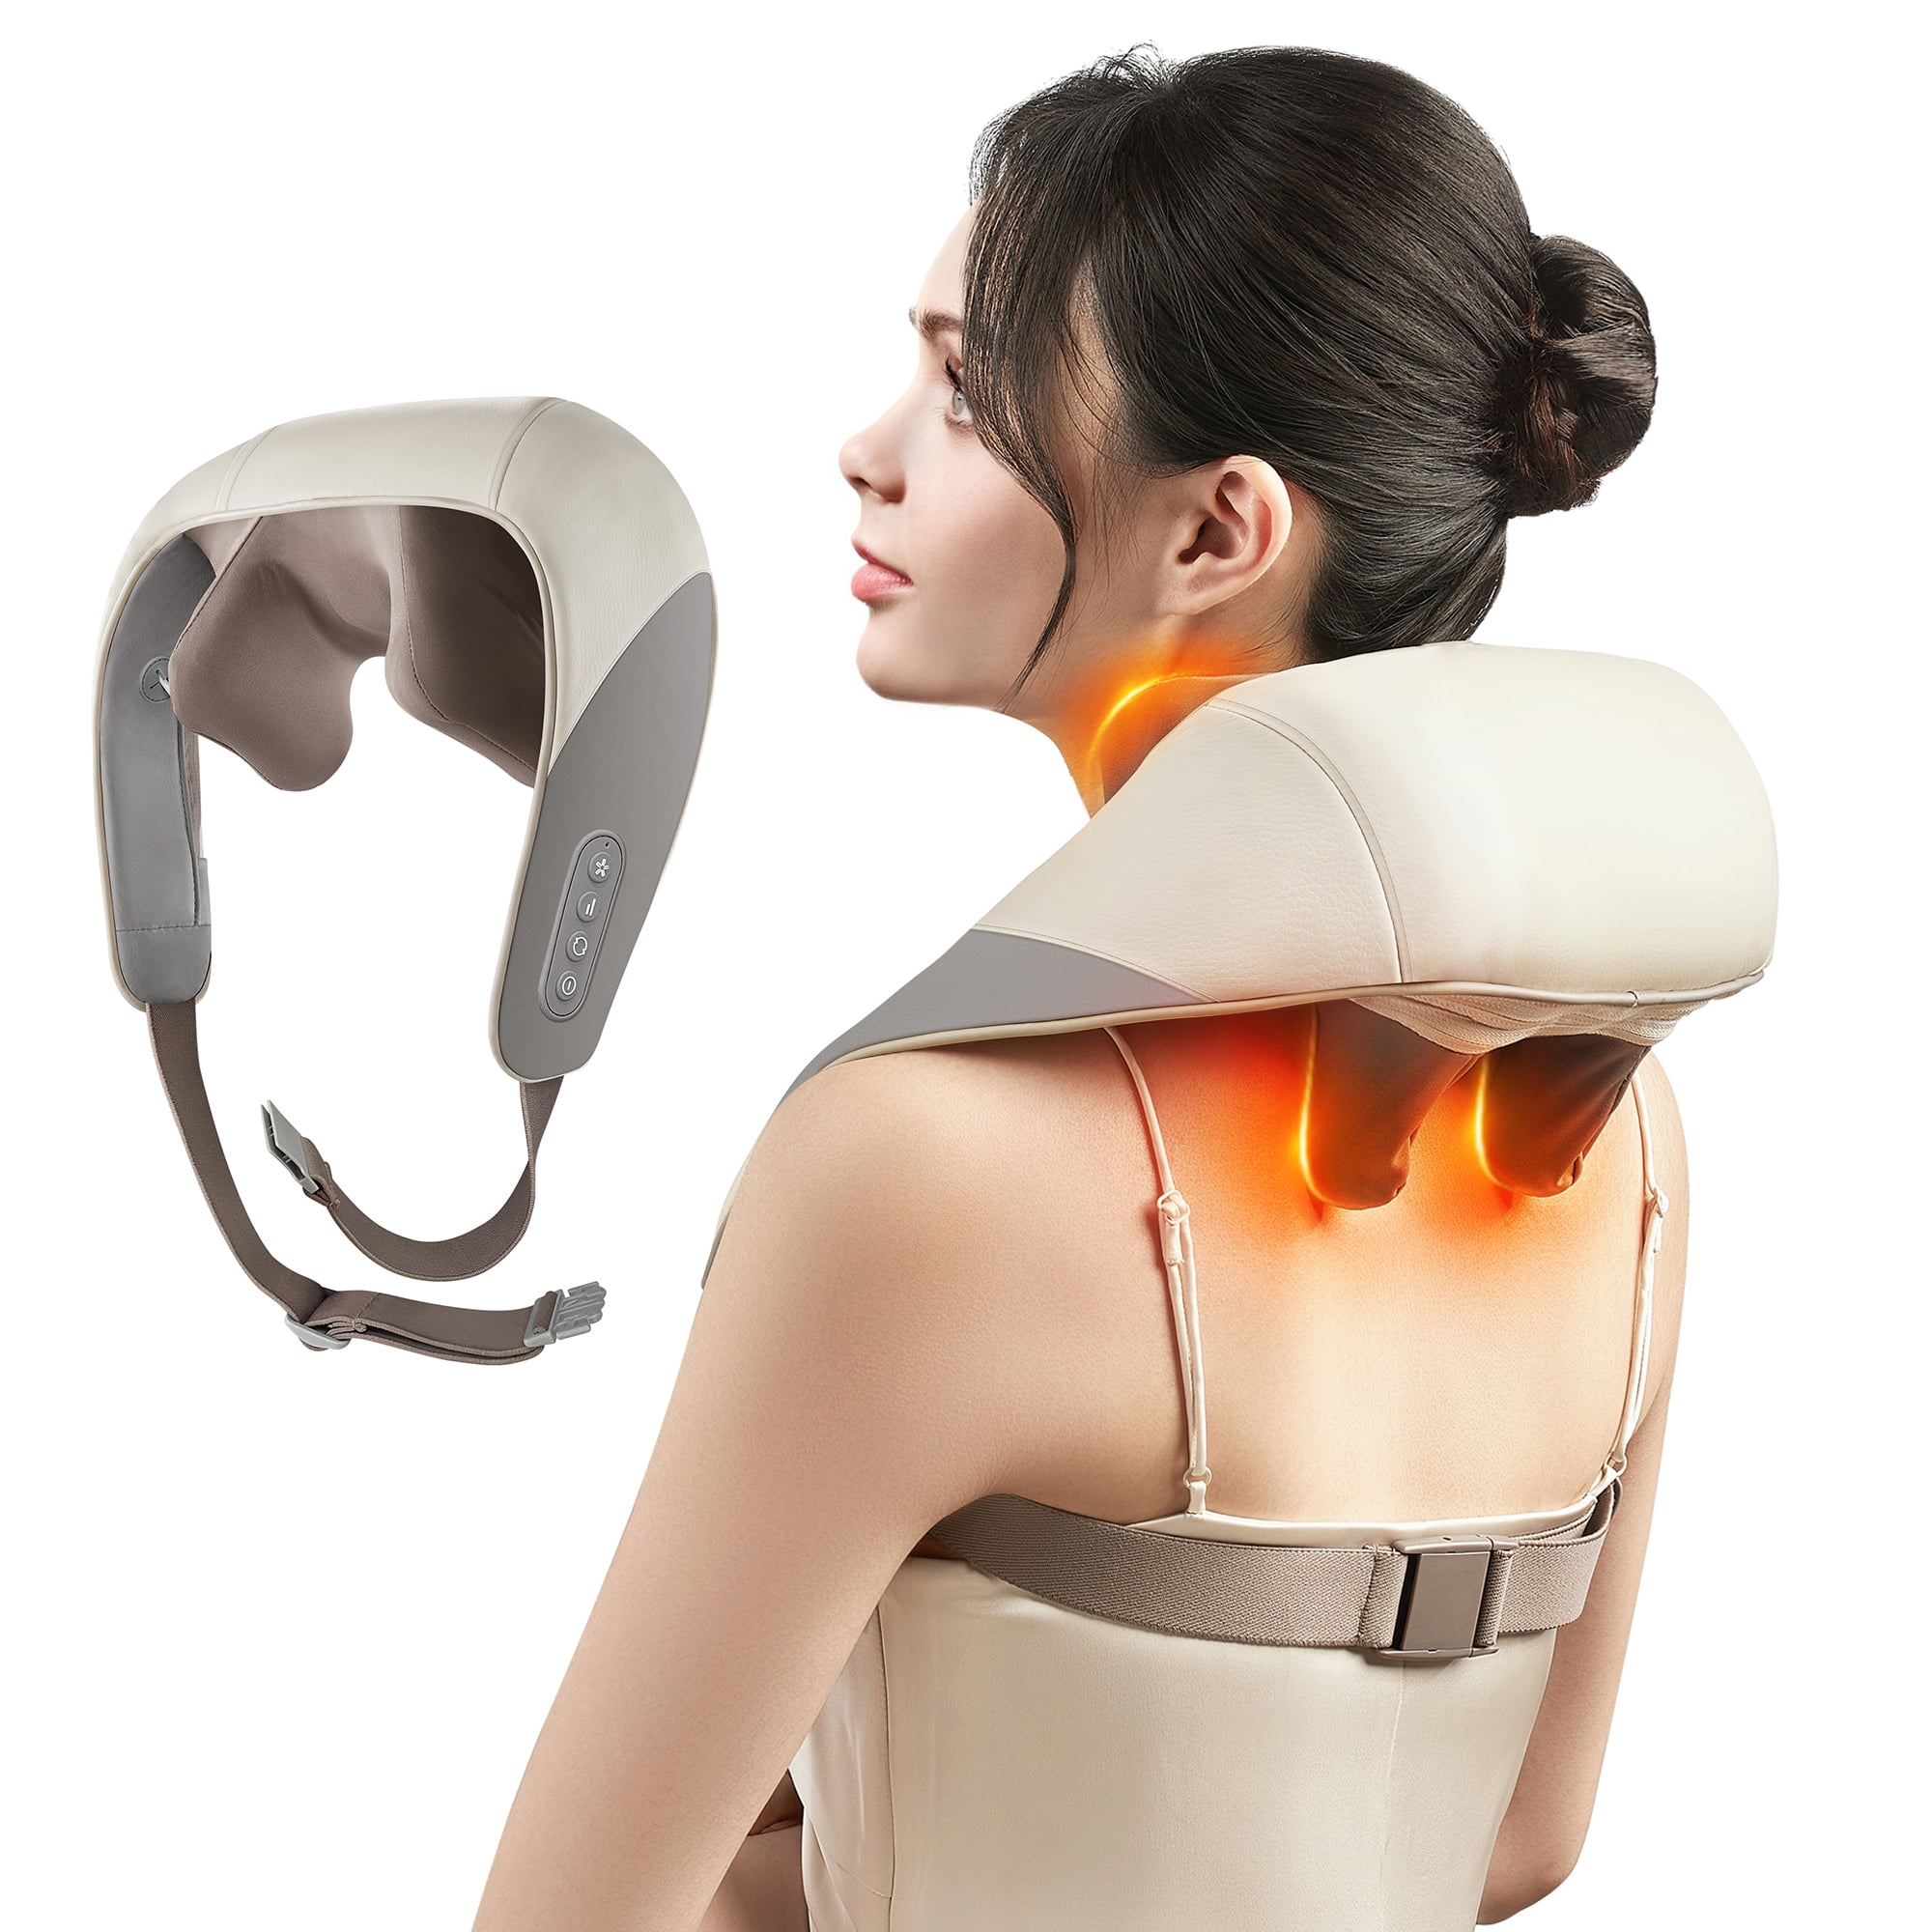  MagicMakers Back Massager Neck Massager with Heat